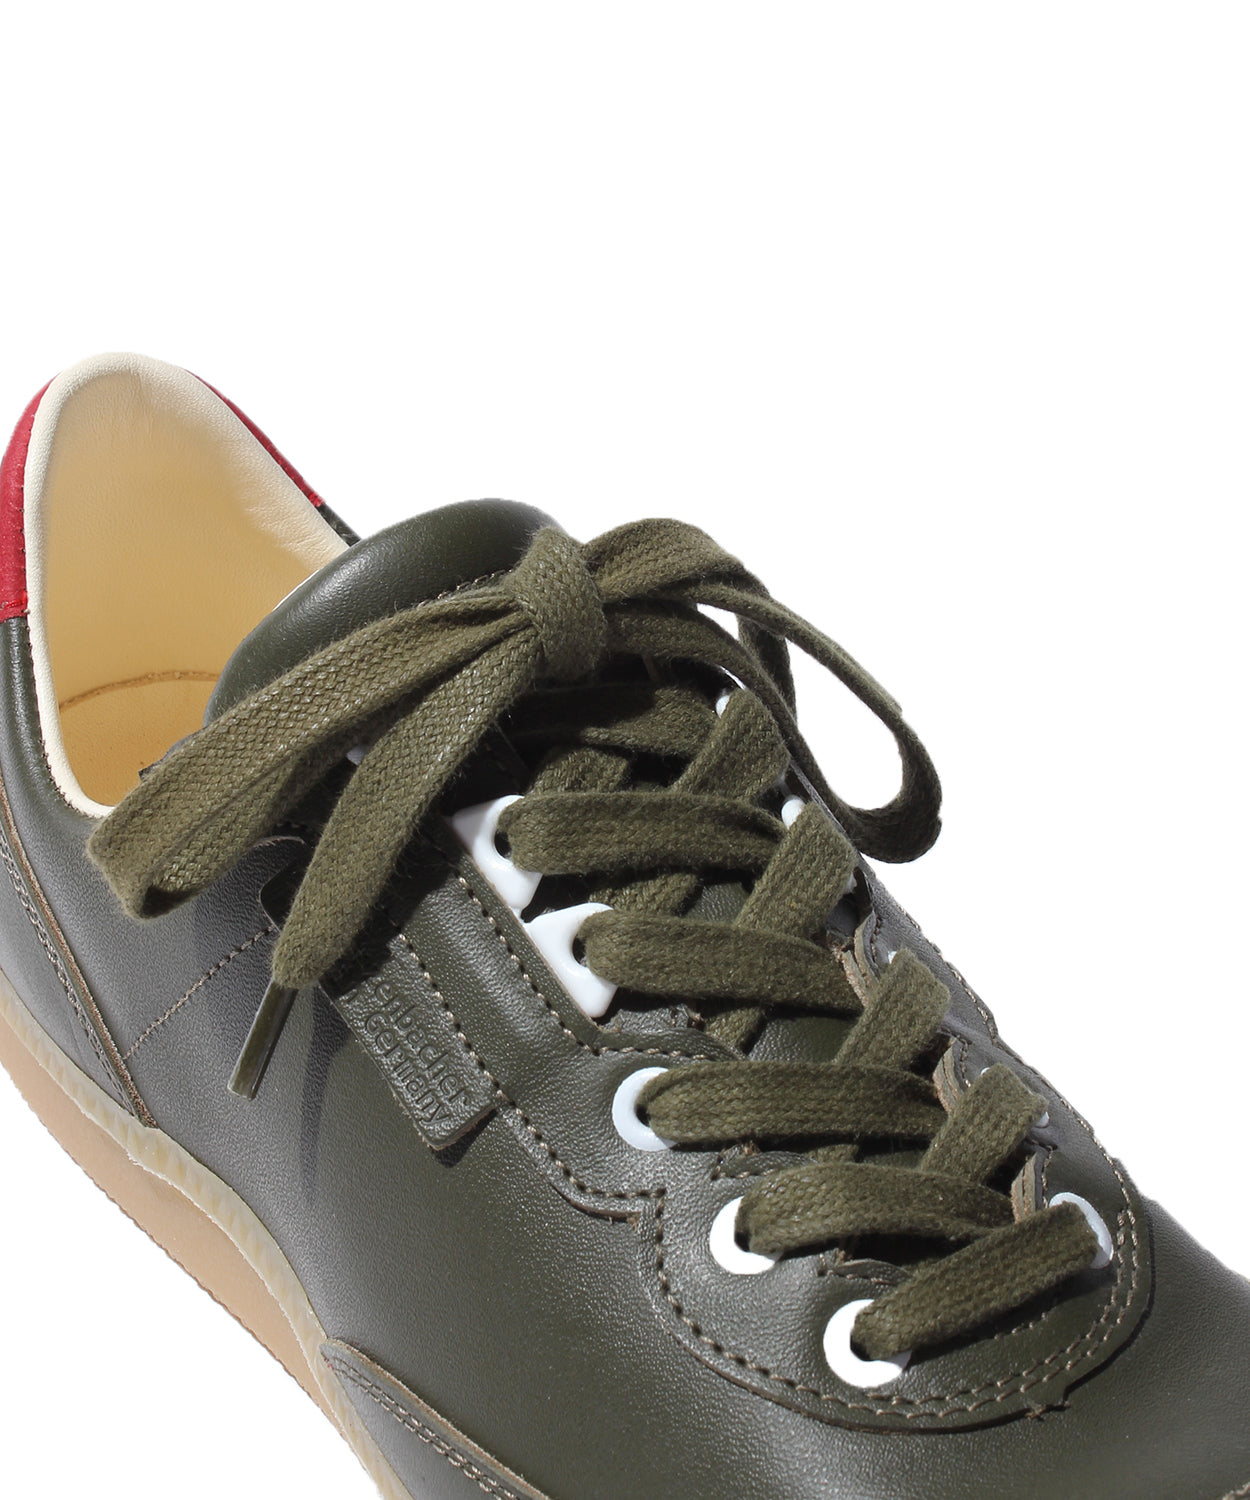 【 24SS 】Schwarzenbacher 1759 CLASSIC  LACED UP VTG LEATHER / OLIVE